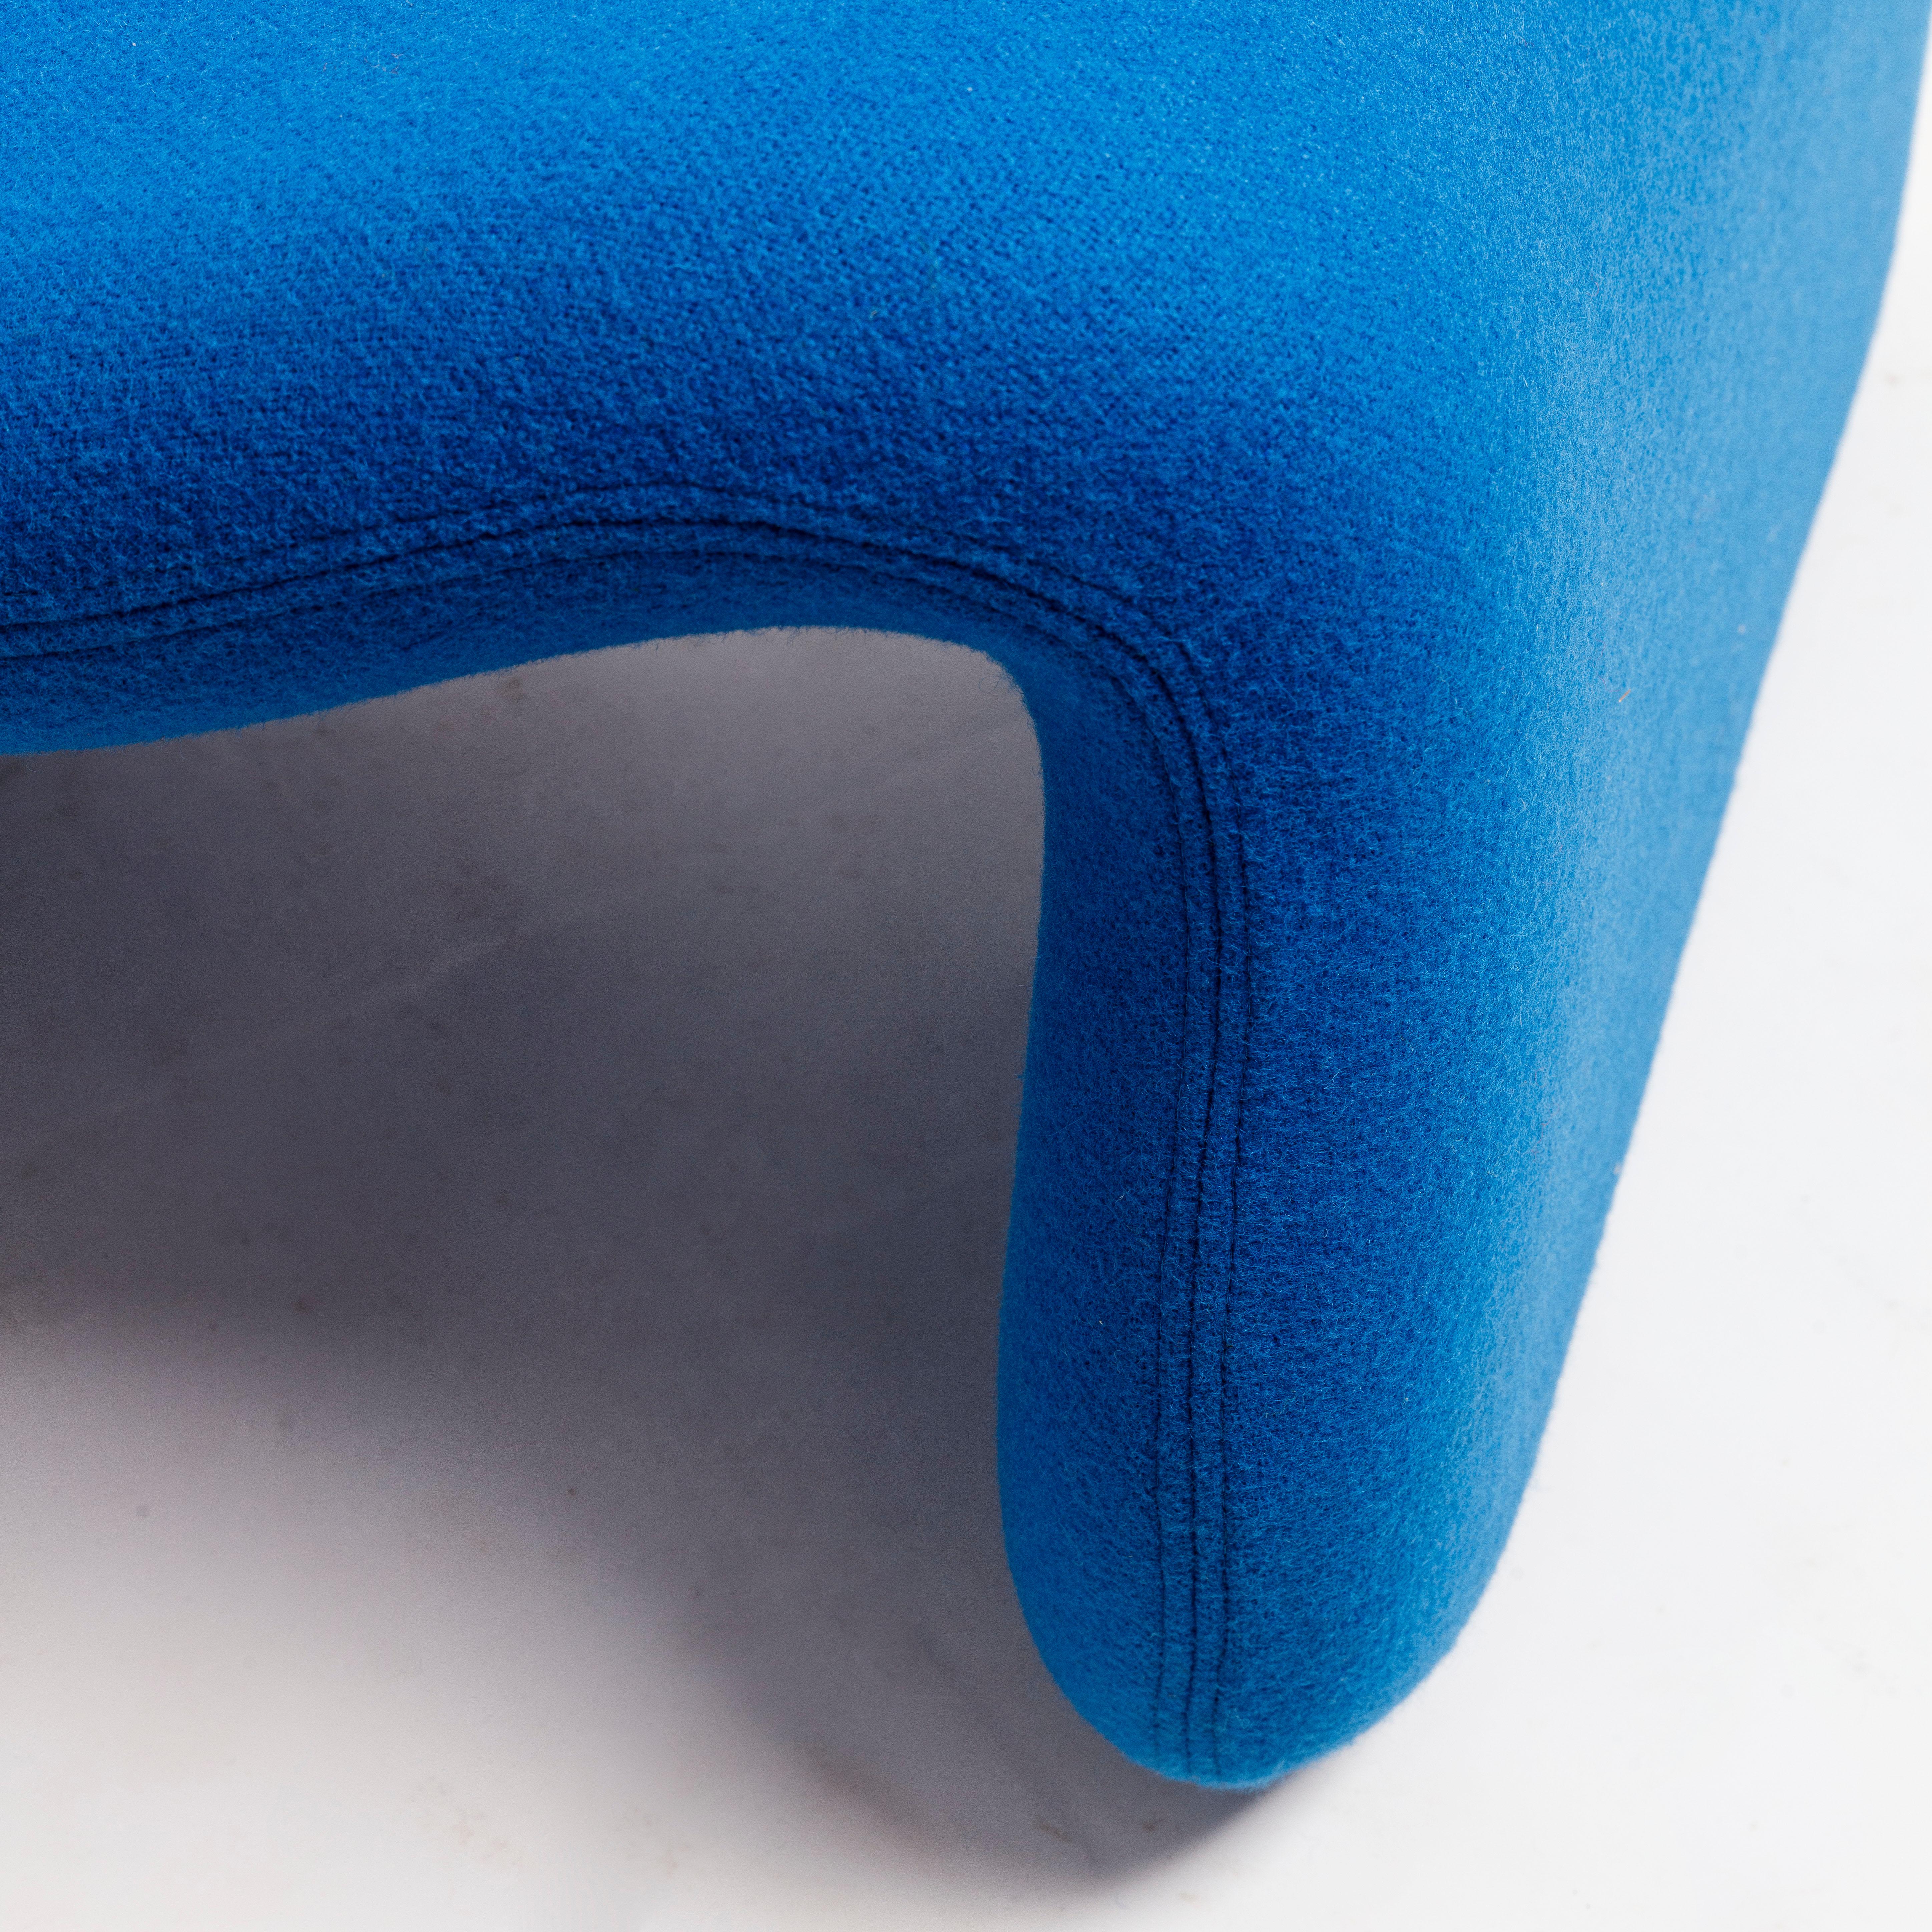 Olivier Mourgue Djinn Blue Armchair for Airborne 1960s New Kvadrat Fabric 6